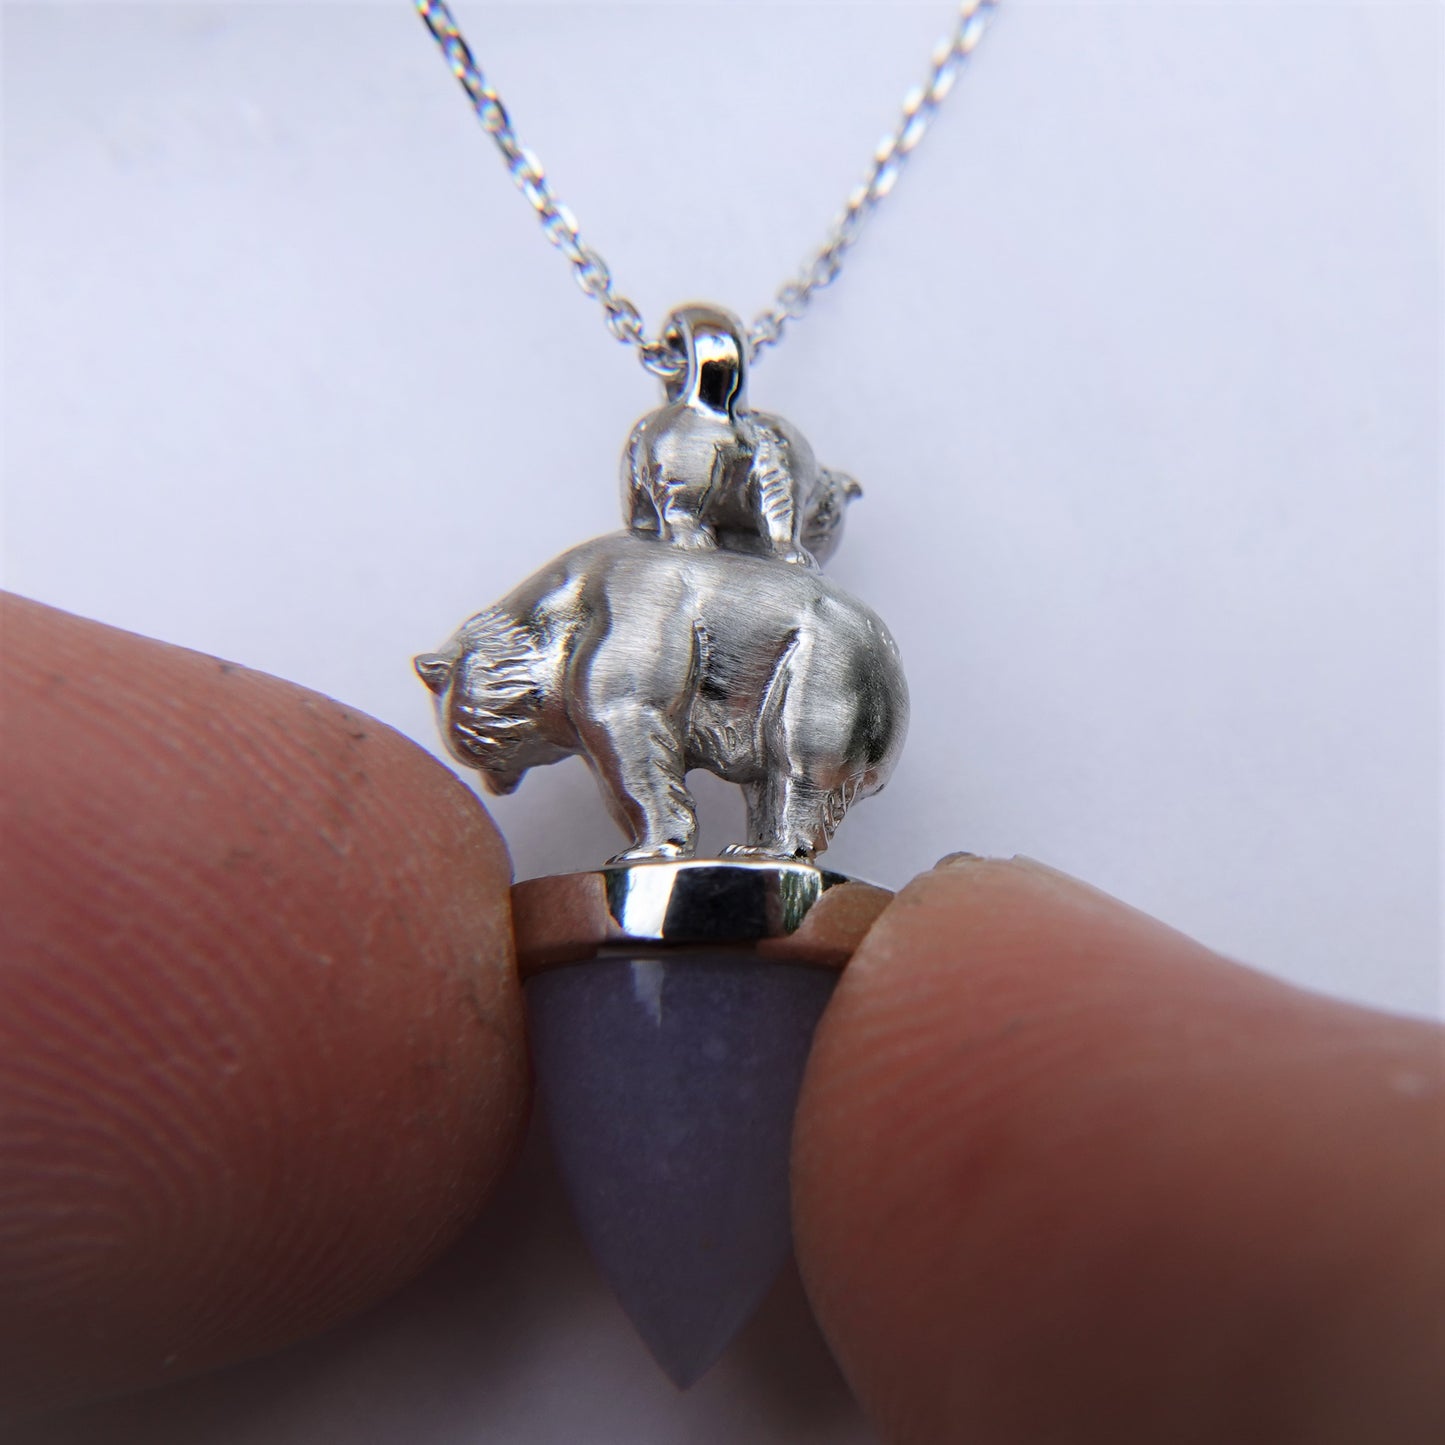 Polar bear and child necklace. Solid white gold bears on a blue Chalcedony gemstone, with a white gold chain. *This piece is finished and ready to be shipped*